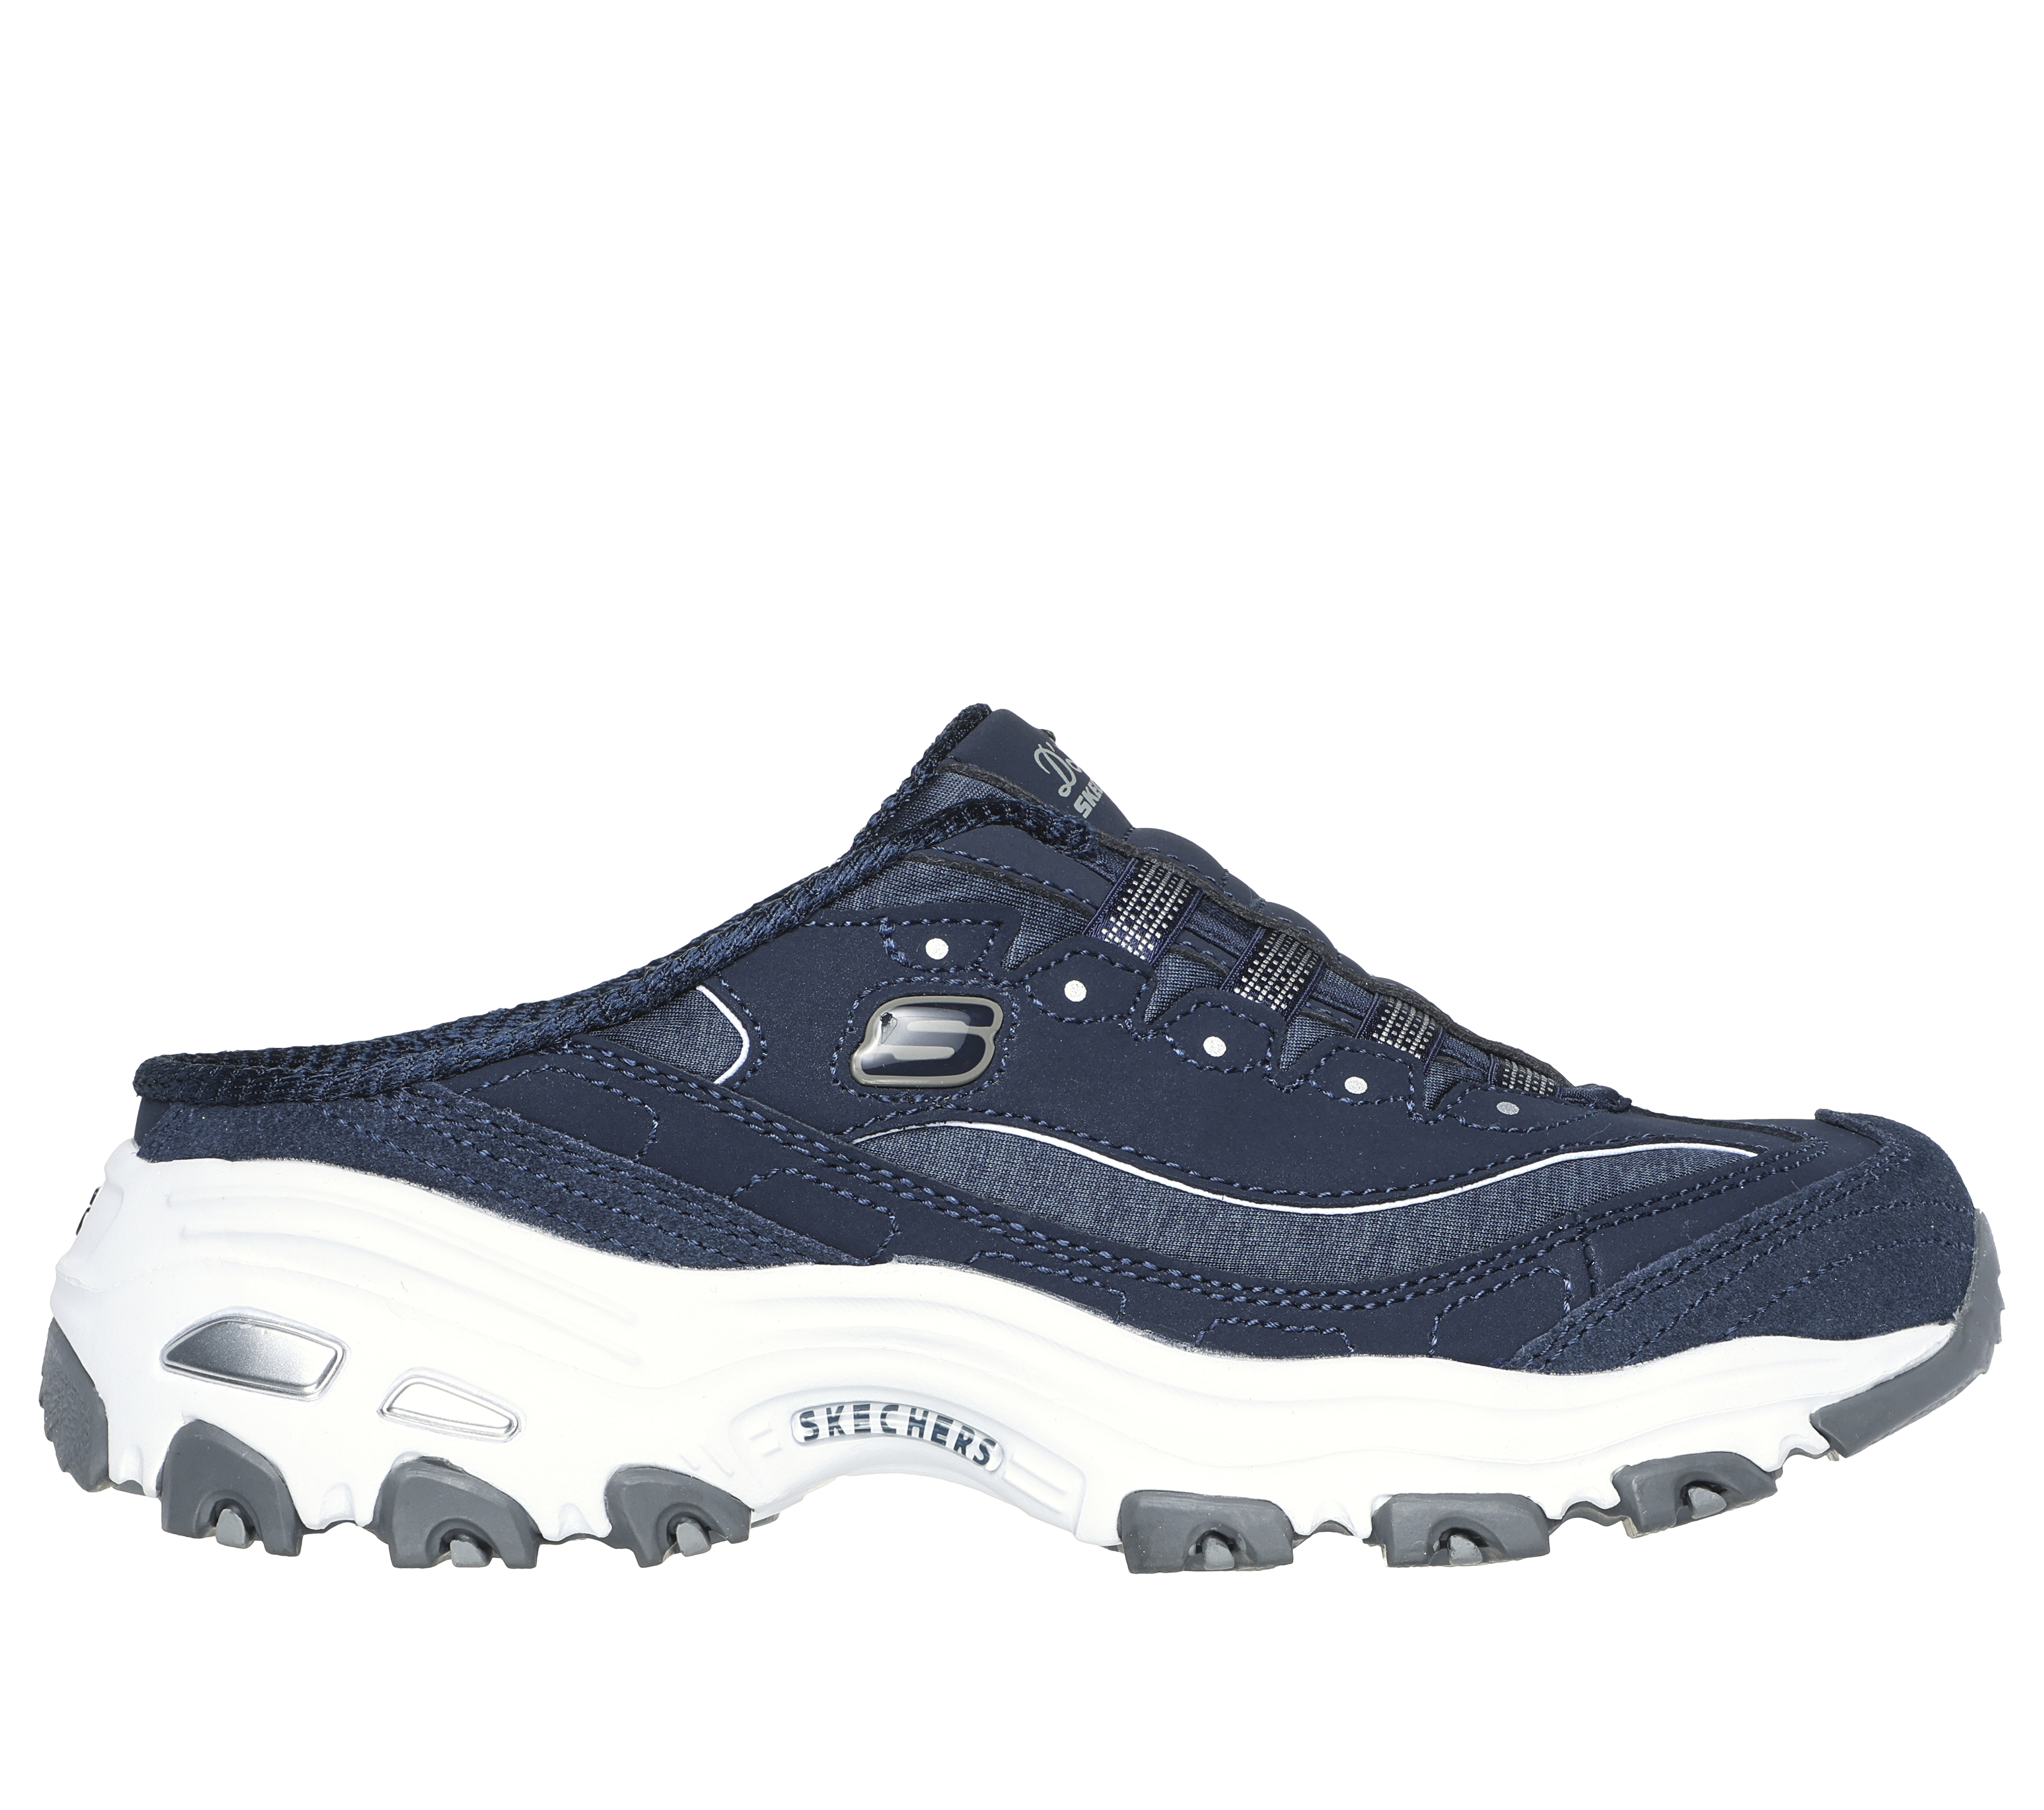 SKECHERS - SKECHERS D'LITES 3 Go to the next level of sporty style